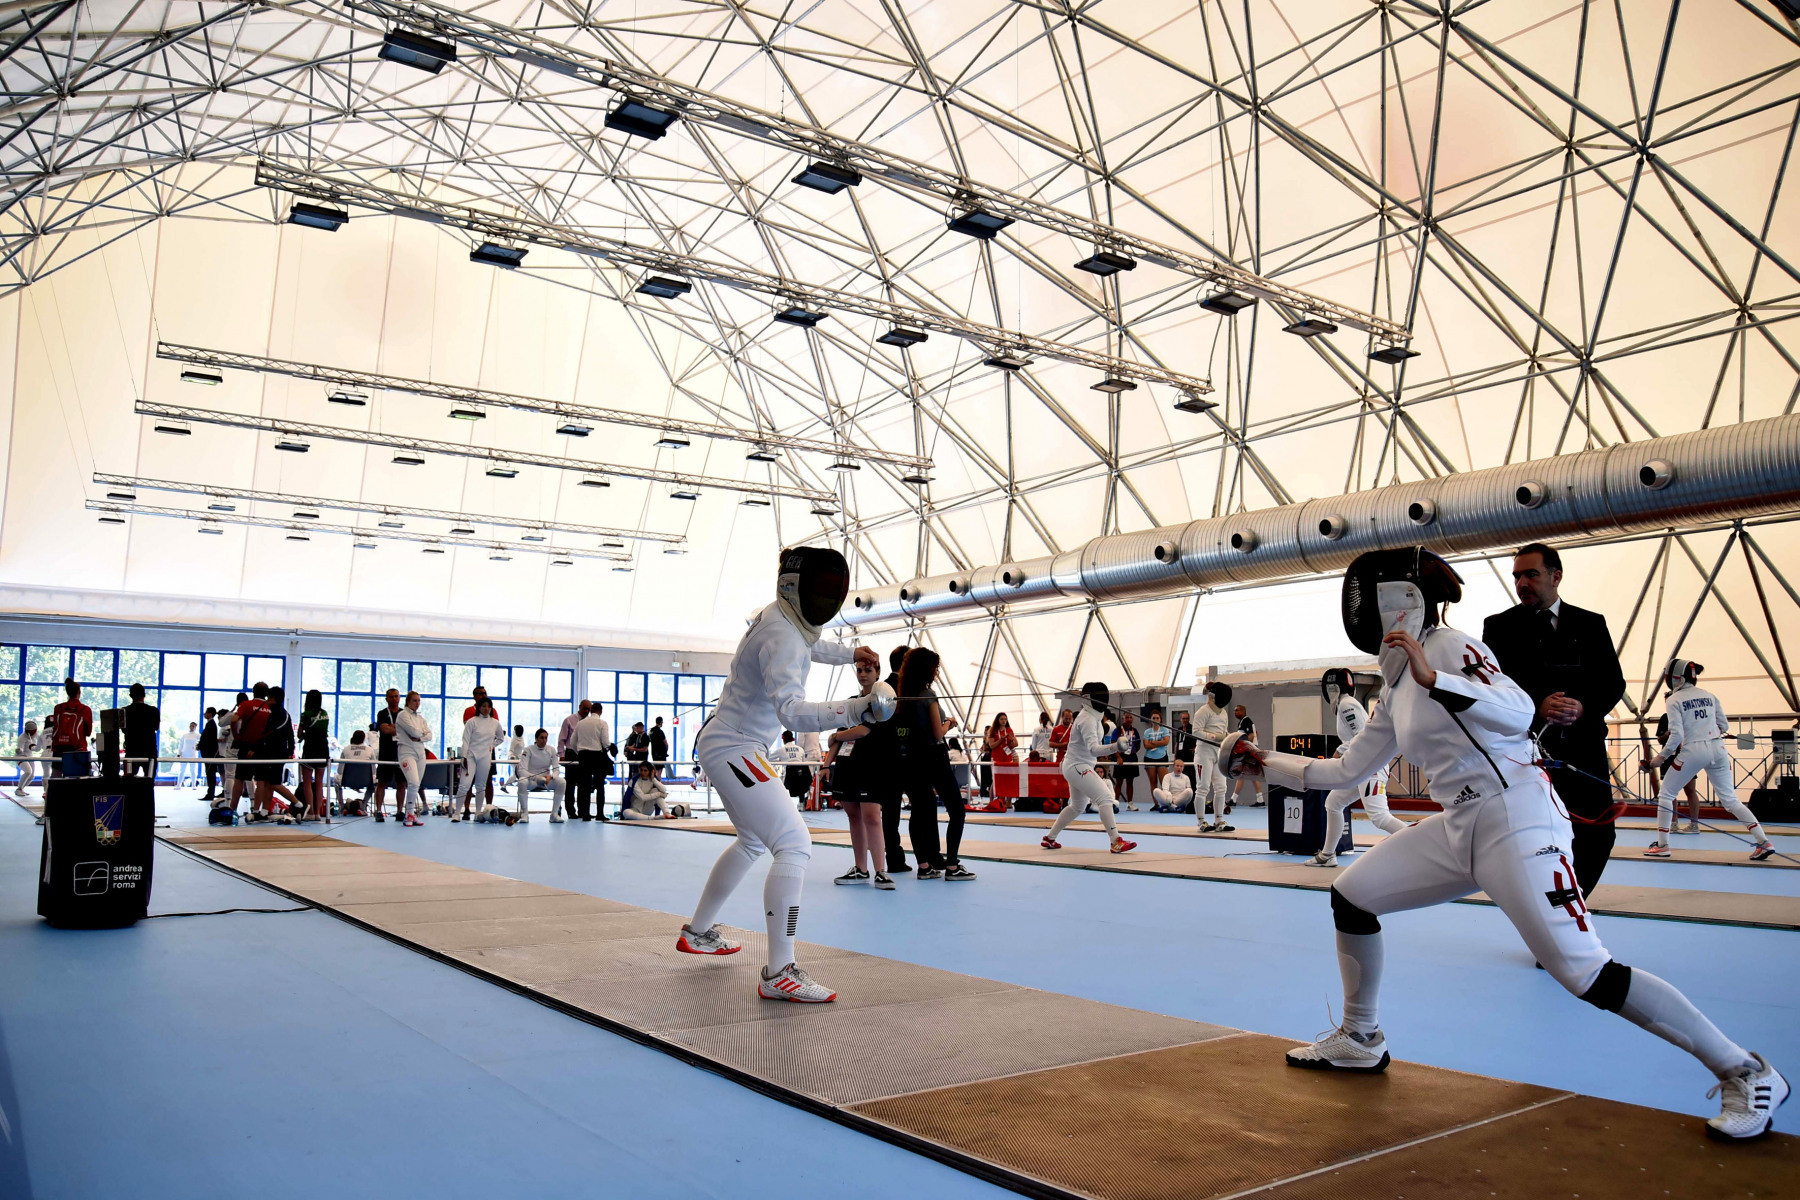 The University Sports Centre in Salerno played host to the first finals in fencing ©Naples 2019